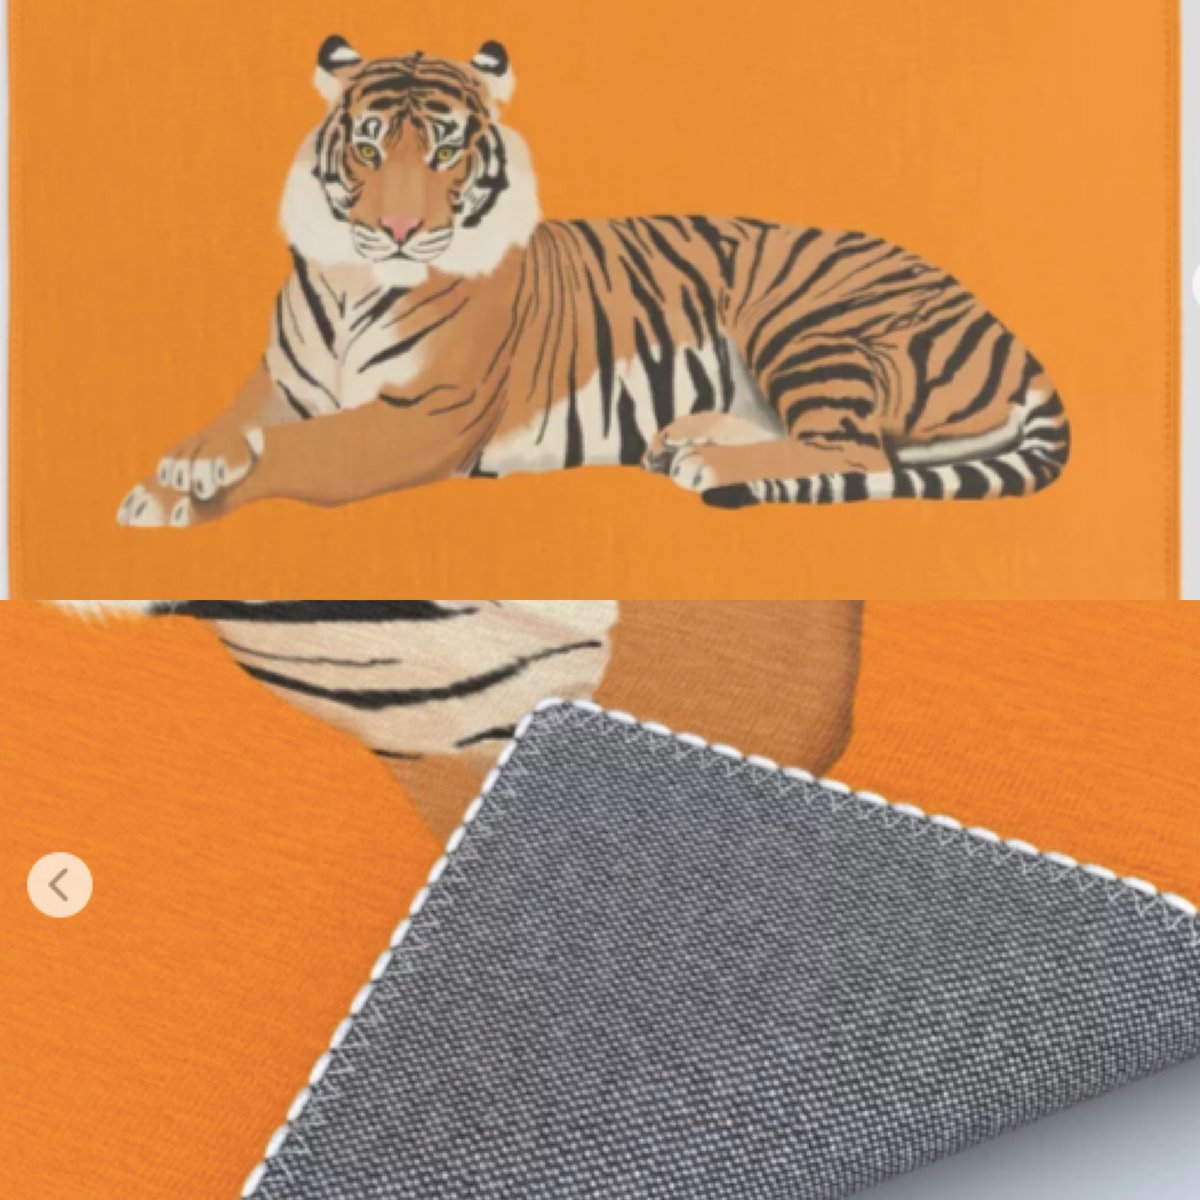 thanks to the orange TIGER fan who bought a rug! Also available in purple and in gold Buy here society6.com/product/orange… #BuyIntoArt #Tigers #GoTigers #Bengals #Clemson #Auburn #RIT #Princeton #EastCentral #SavannahState #GeorgetownCollege #Occidental #BuffaloState #Doane